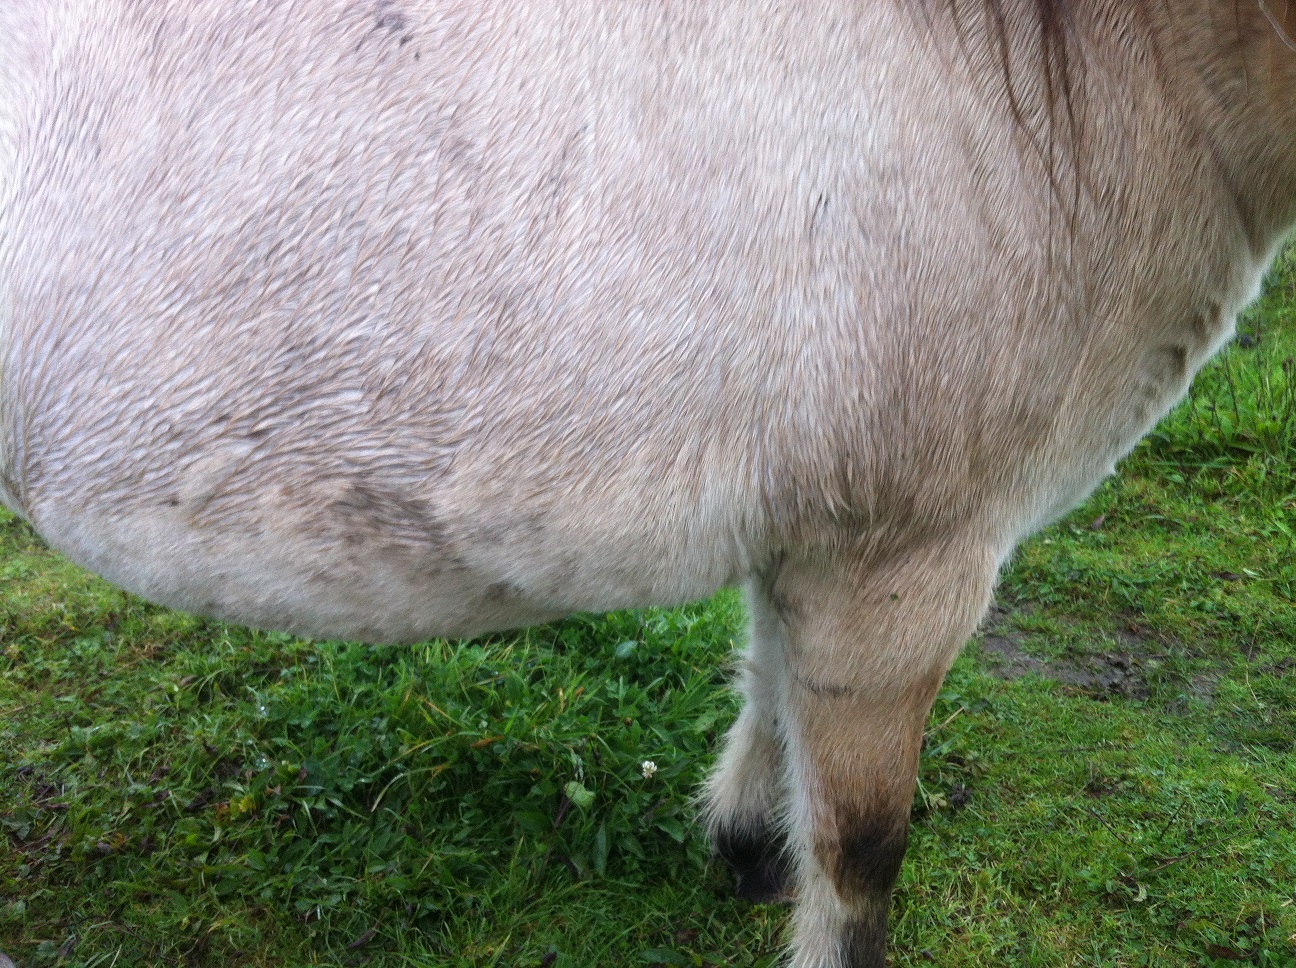 Equine metabolic syndrome (EMS)